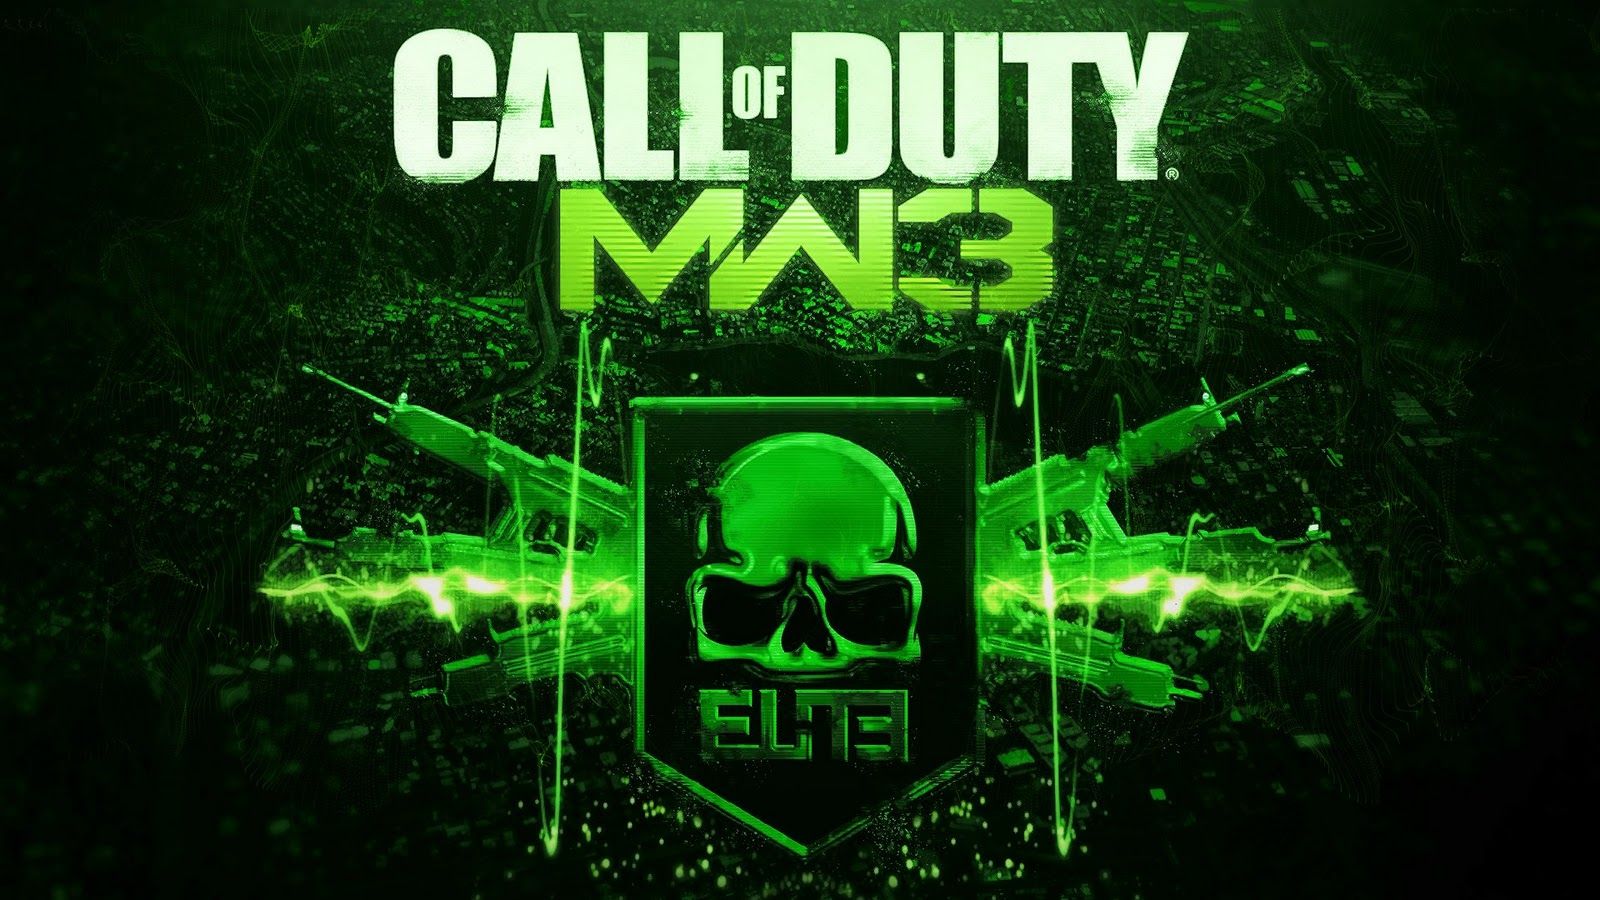 Your Wallpaper: Call of Duty: MW3 Wallpaper